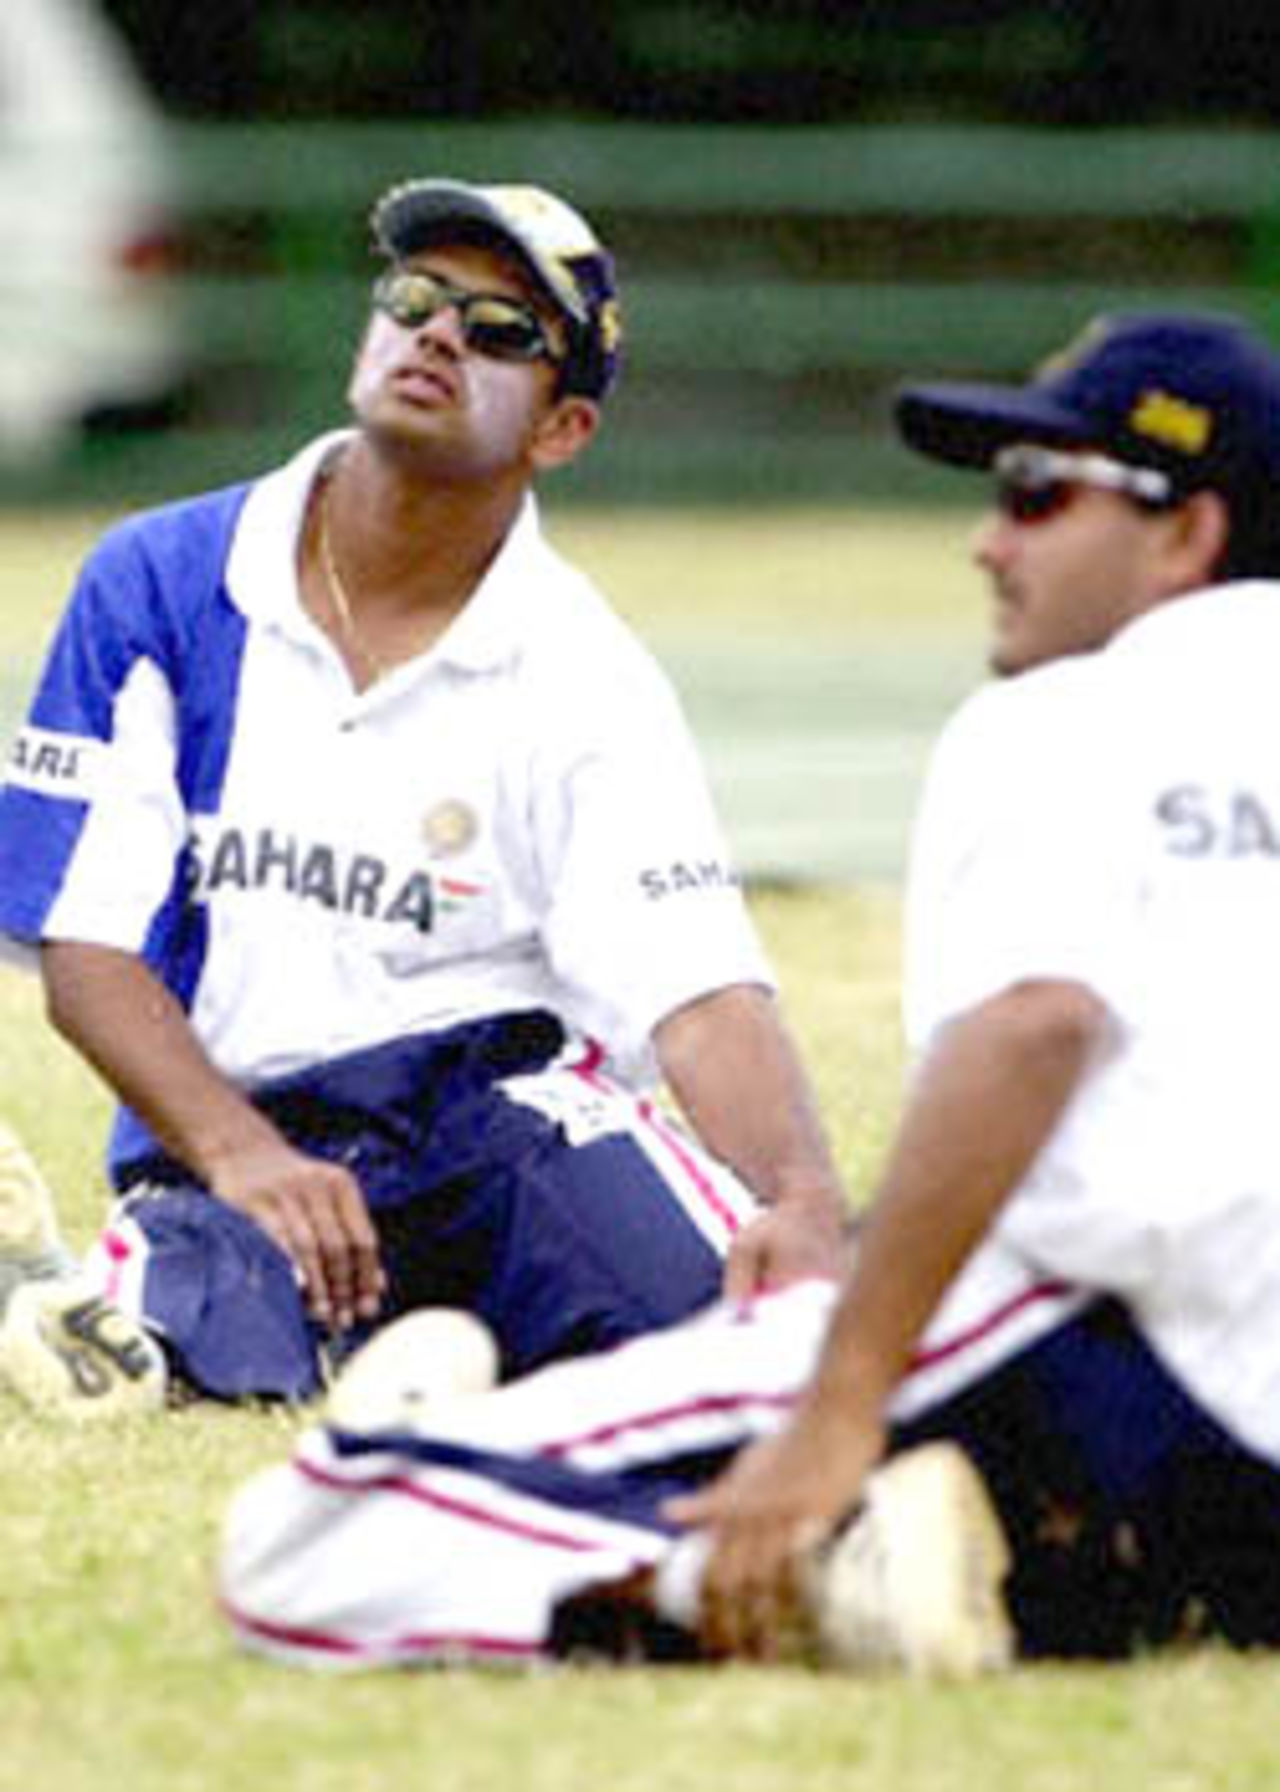 21 August 2001: India in Sri Lanka, Practise Session at the Asgiriya Cricket Stadium in Kandy before the 2nd Test